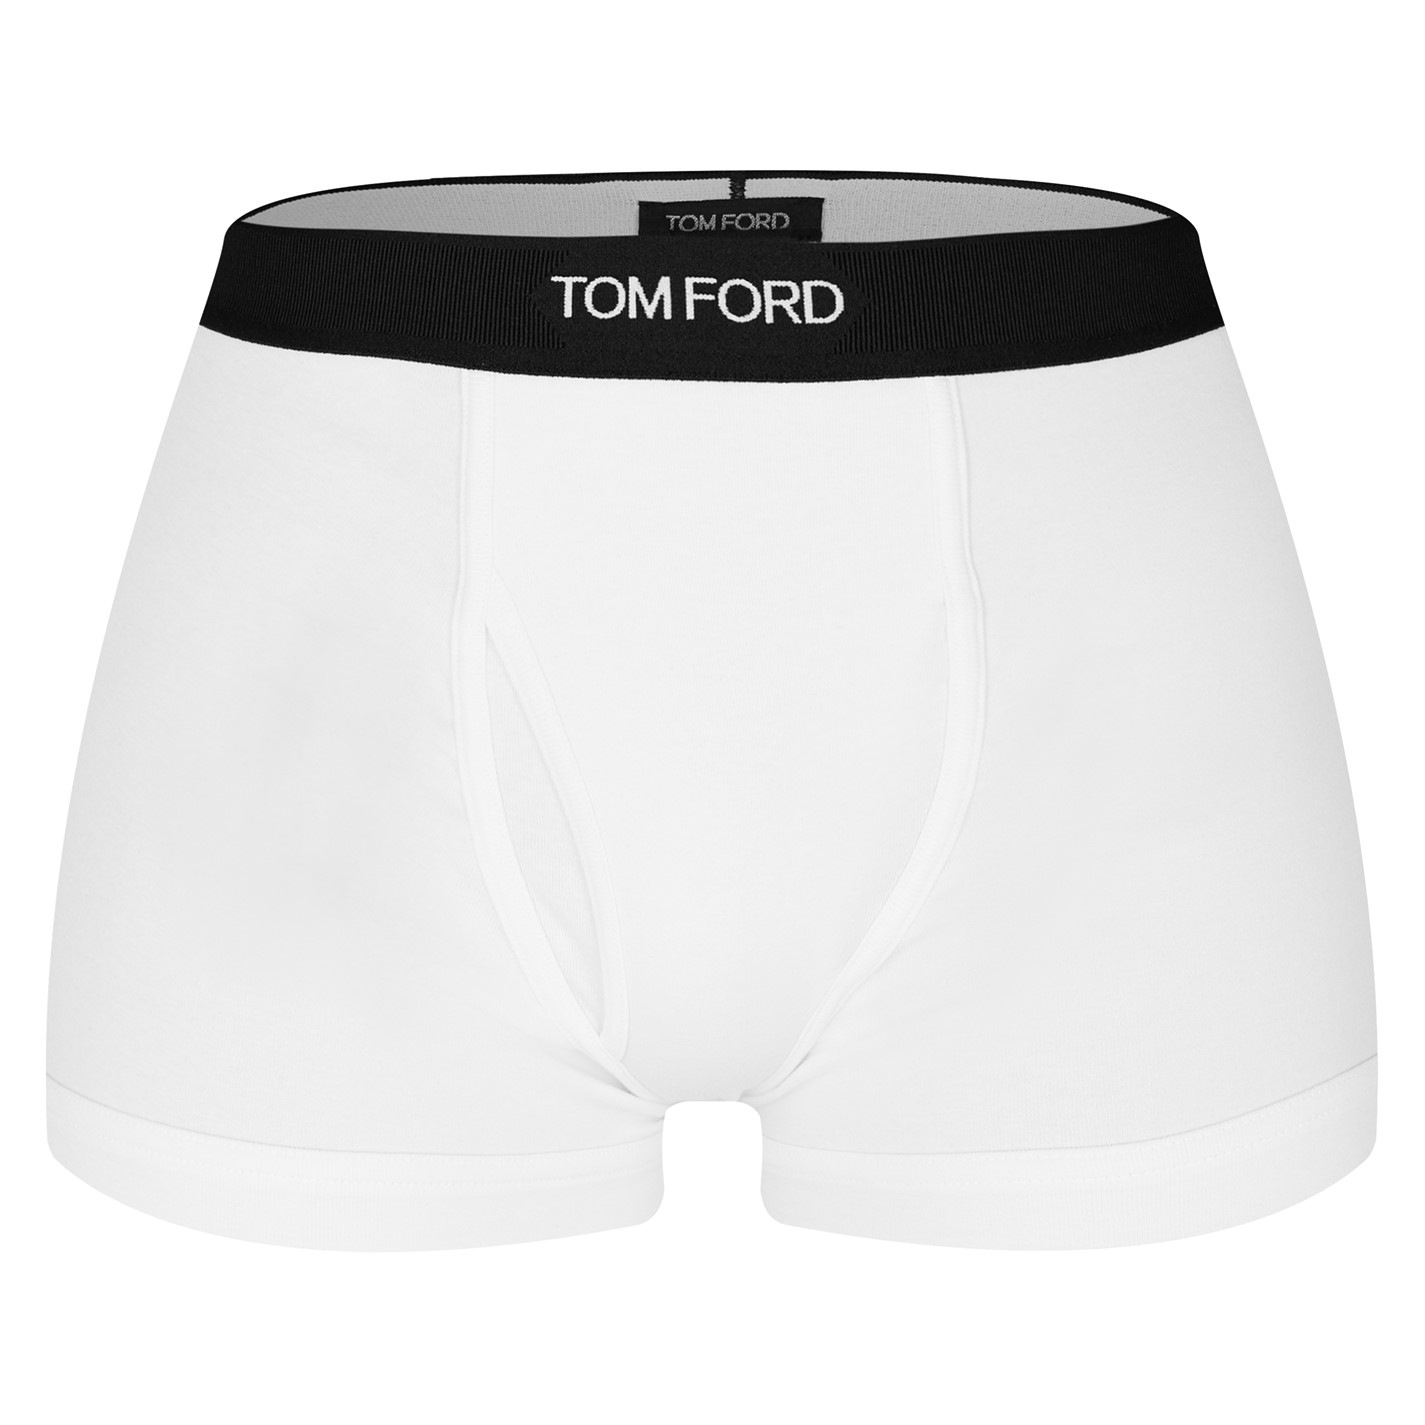 TOM FORD 2-PACK BOXER BRIEFS | REVERSIBLE